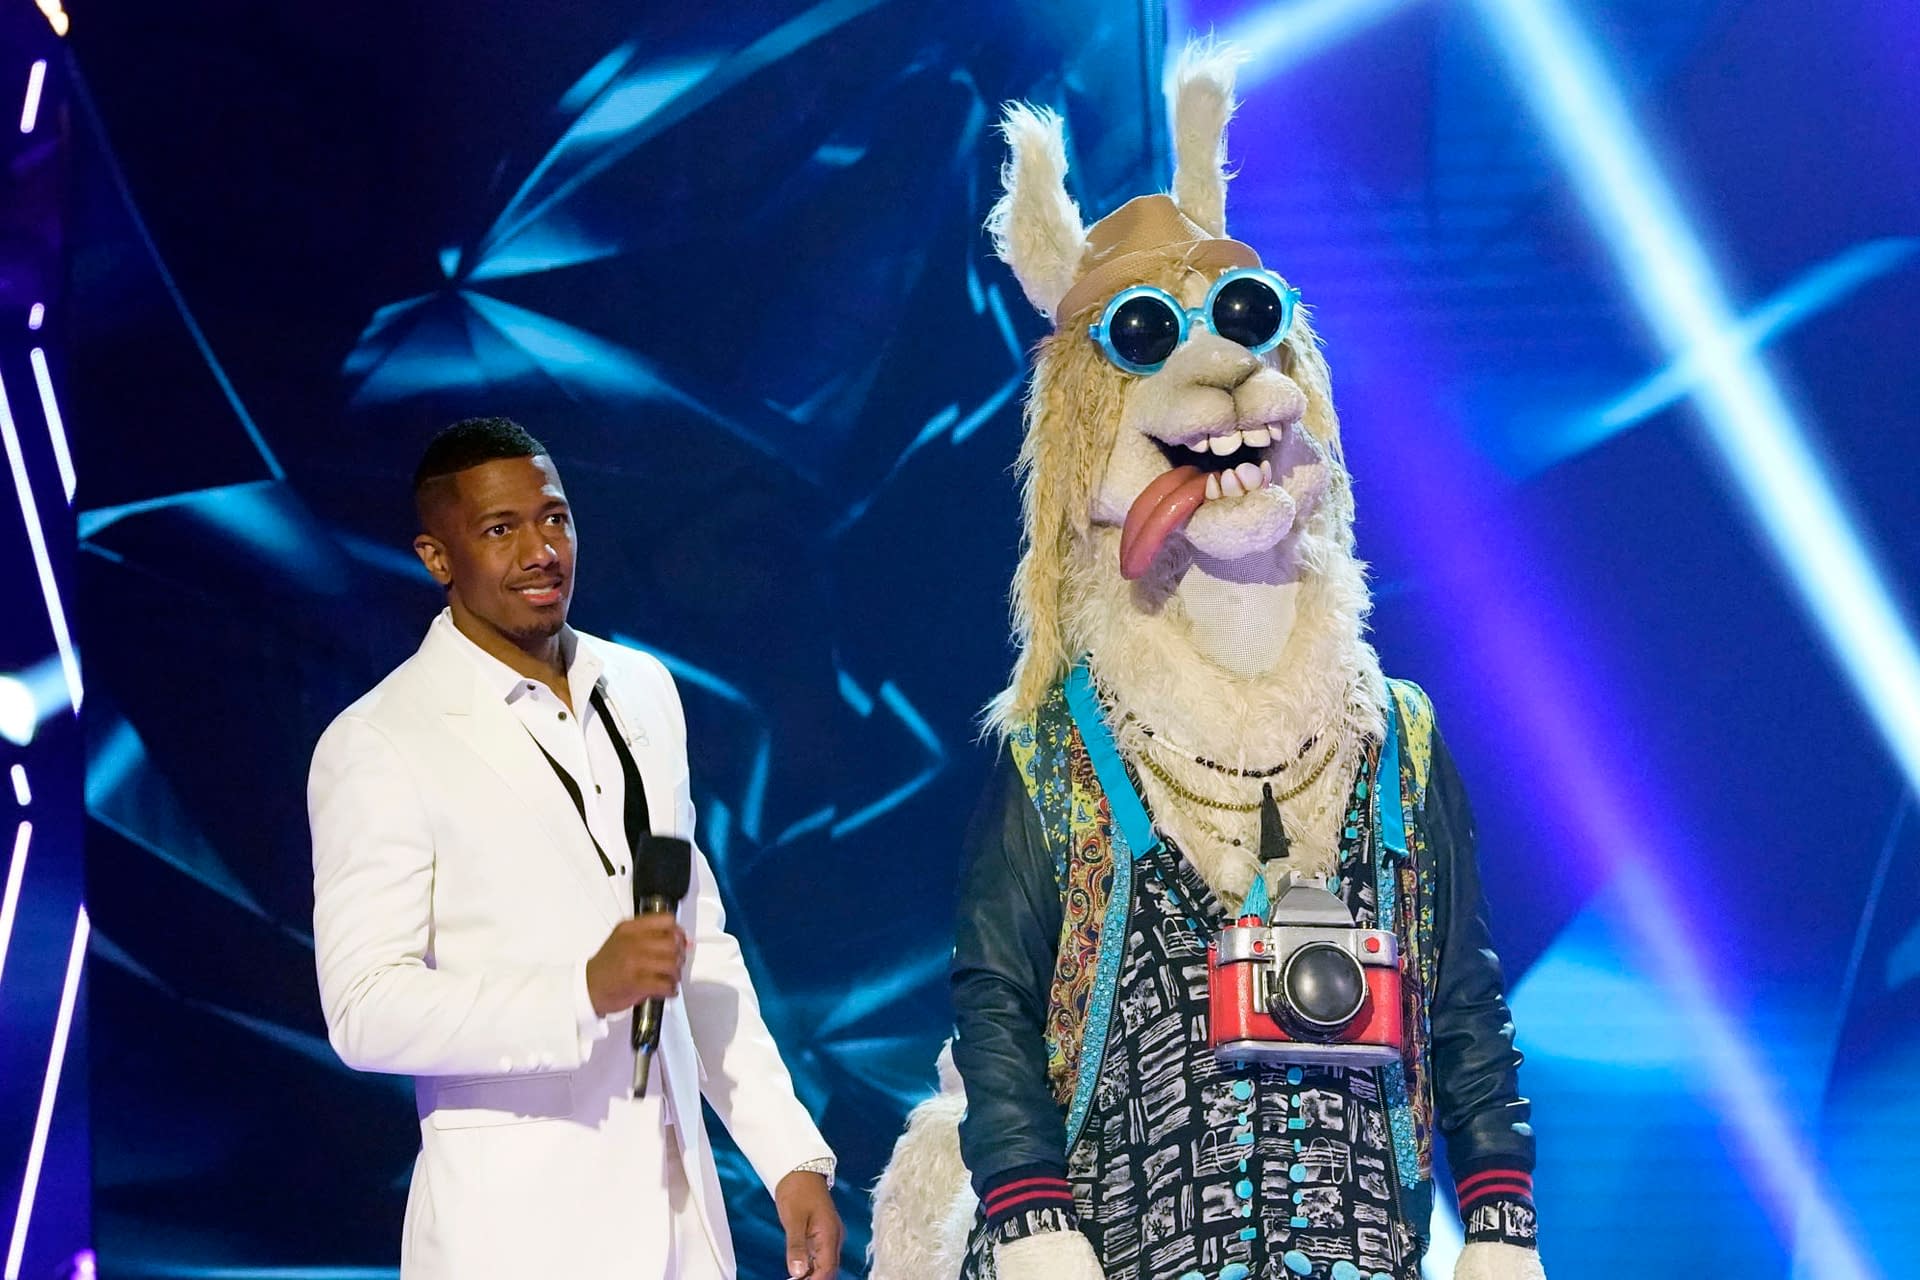 "The Masked Singer" Season 3: With Apologies to Men at Work, Colin Hay [VIDEO]